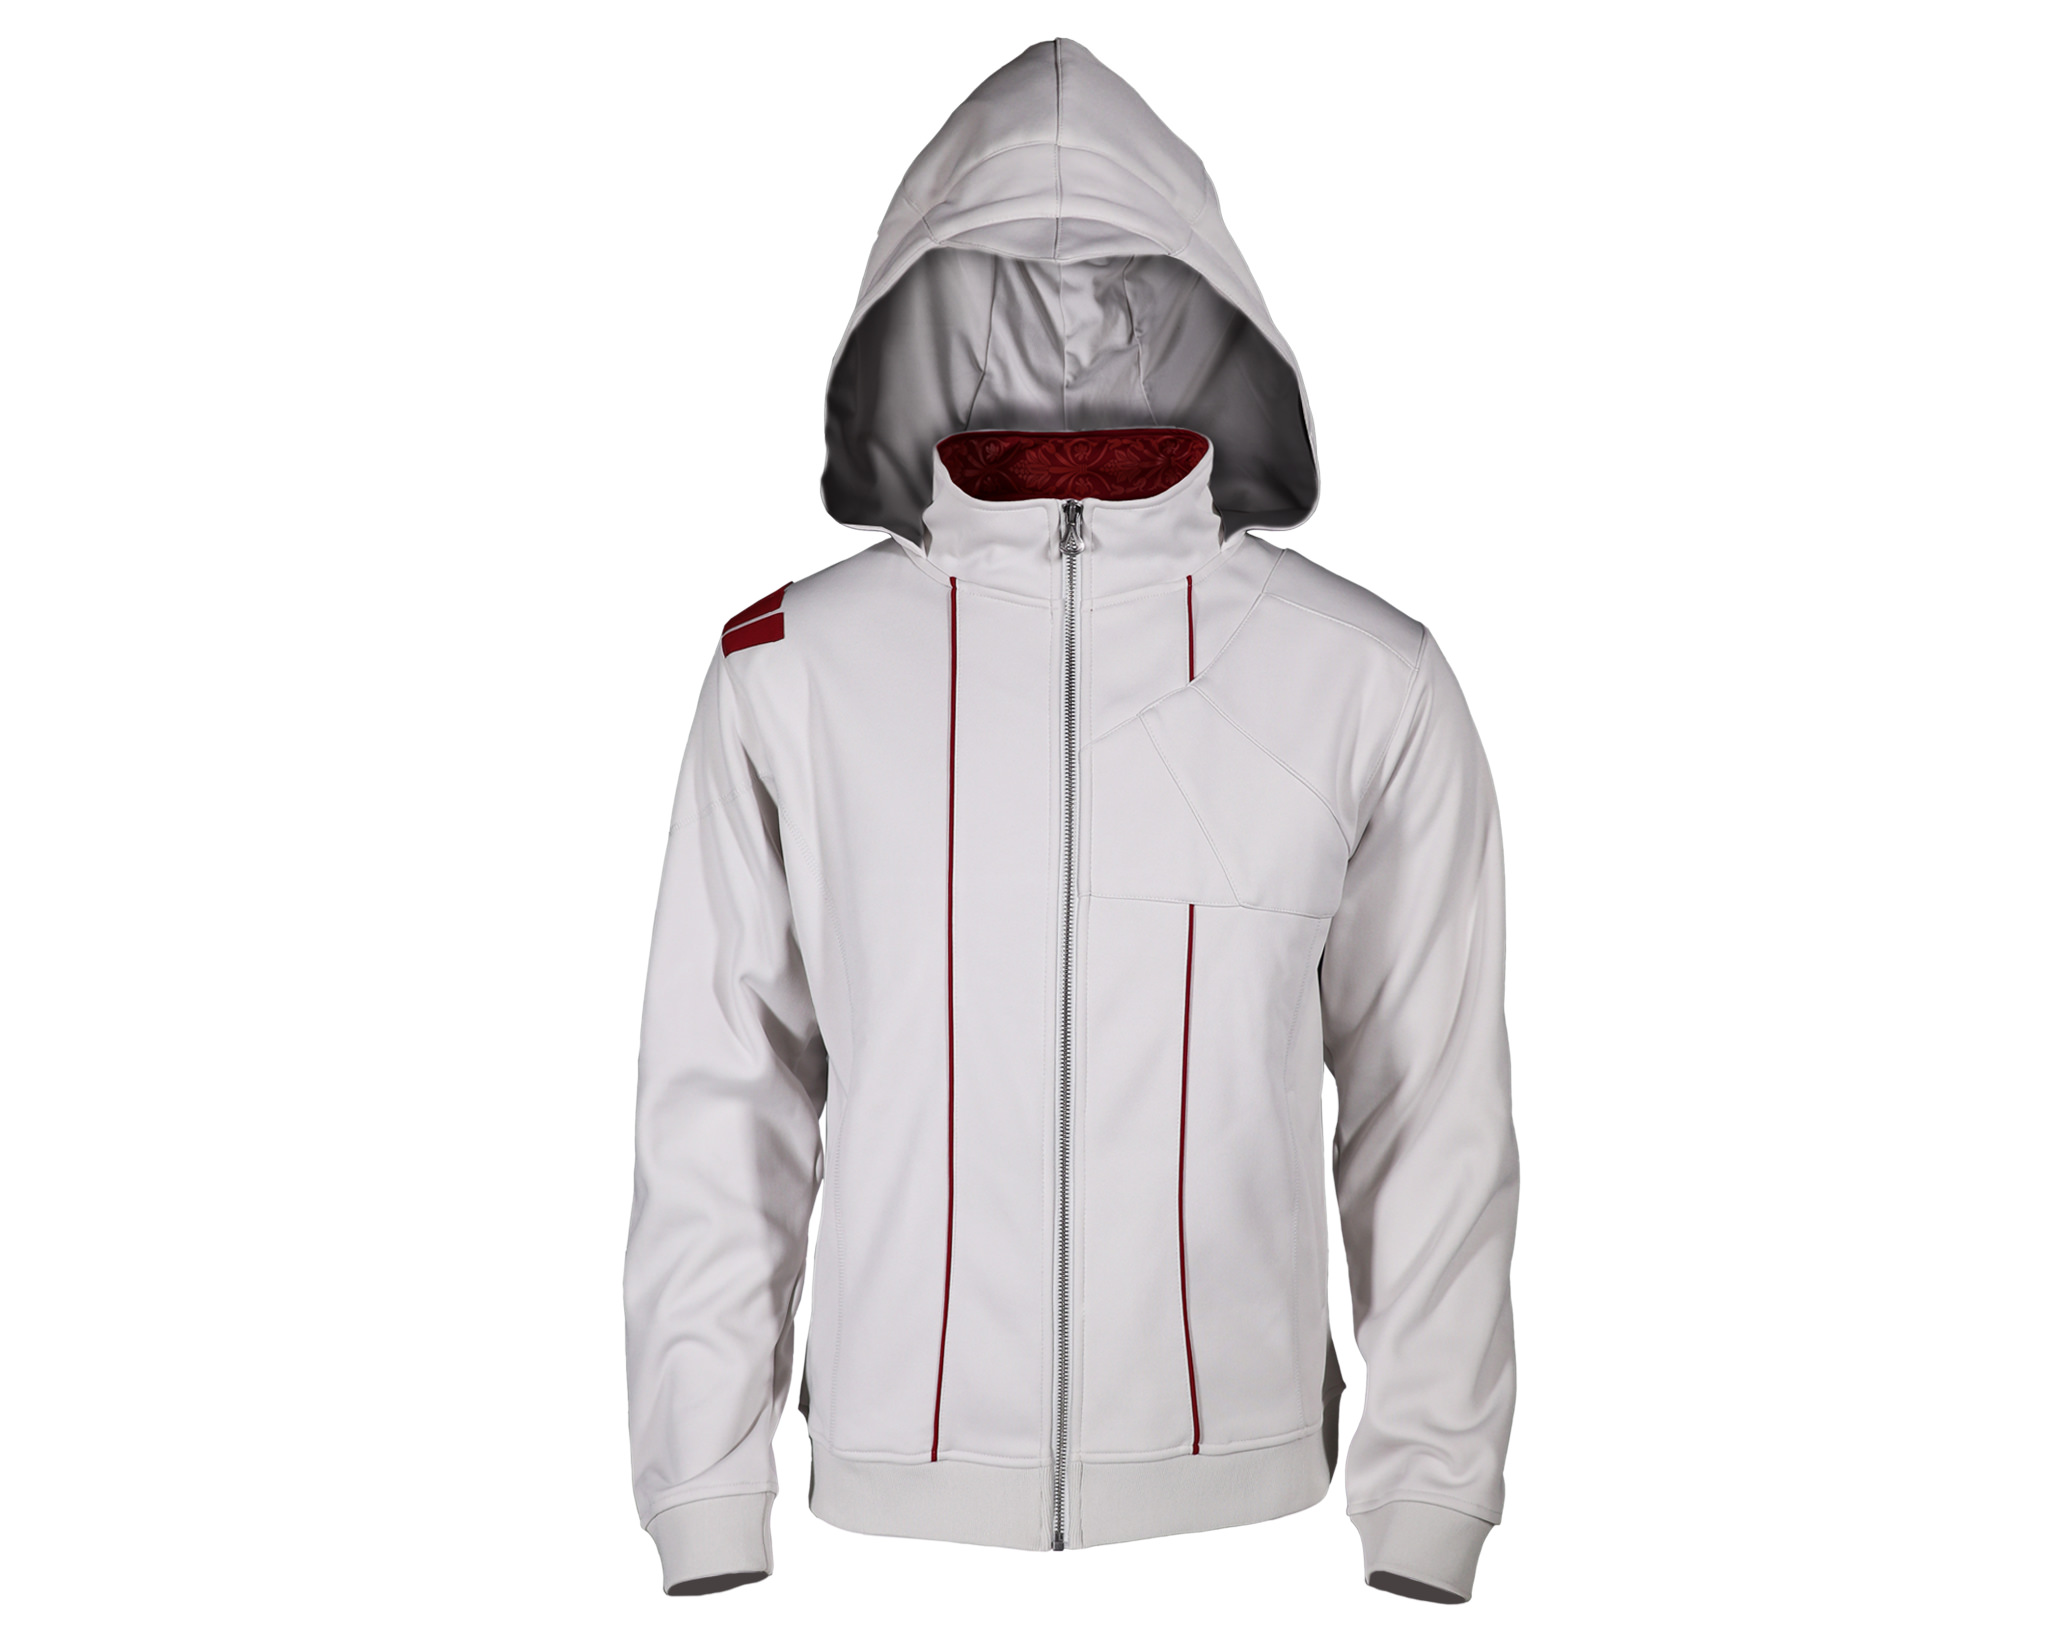 Assassin's Creed | Ezio Mentor Hoodie | Offical Ubisoft store